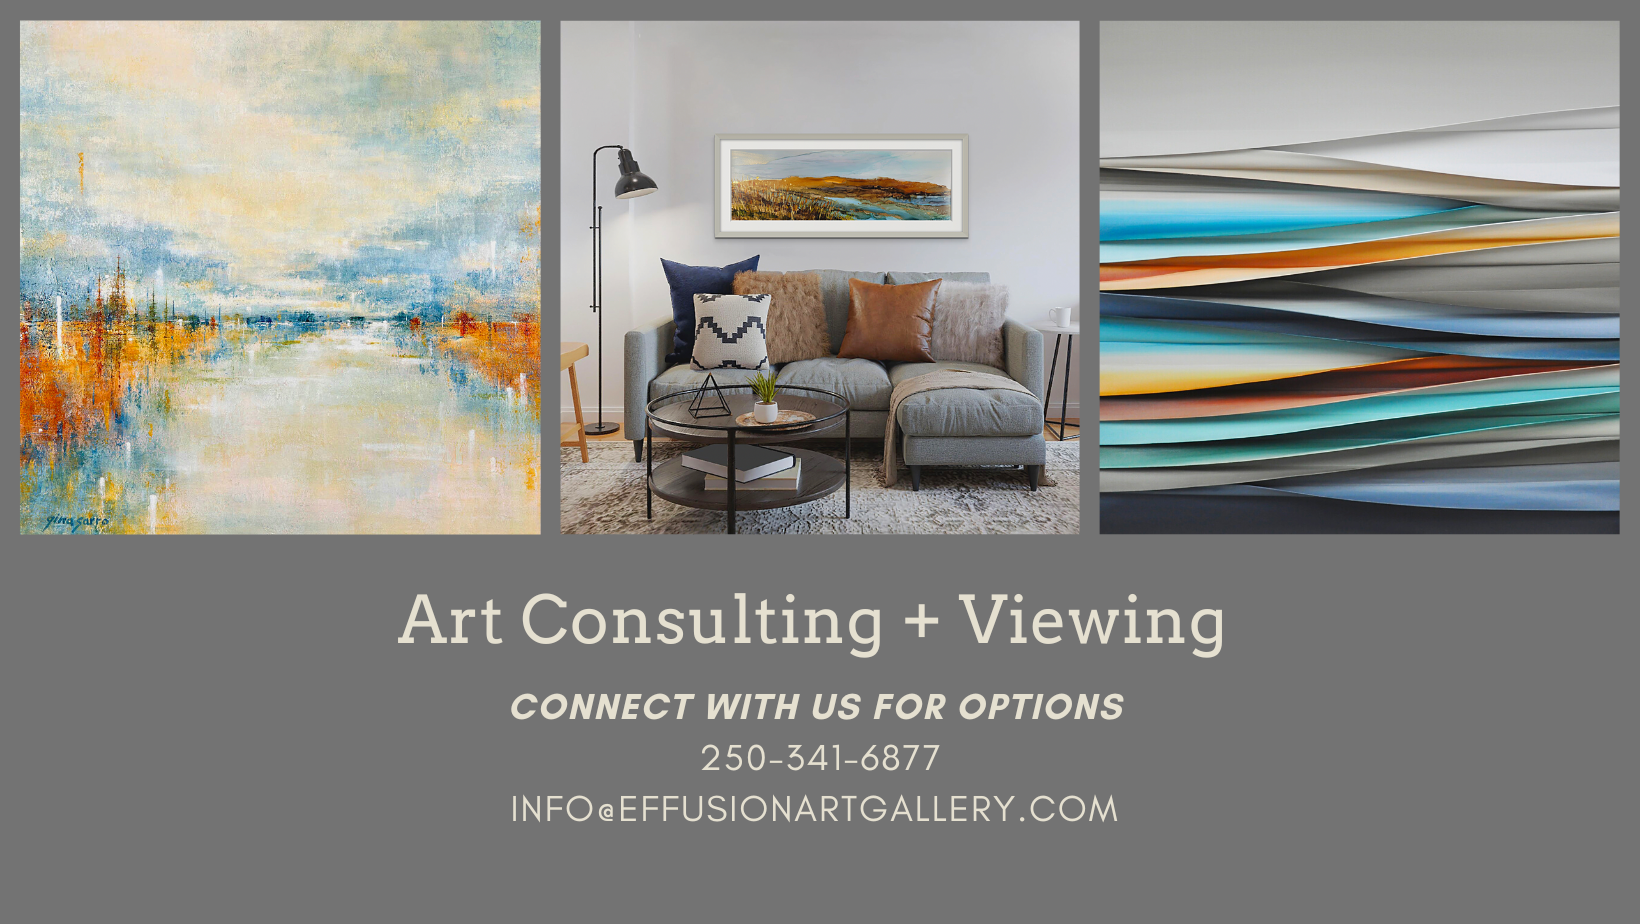 Contact us for more information on expert art consulting and private/virtual viewing options